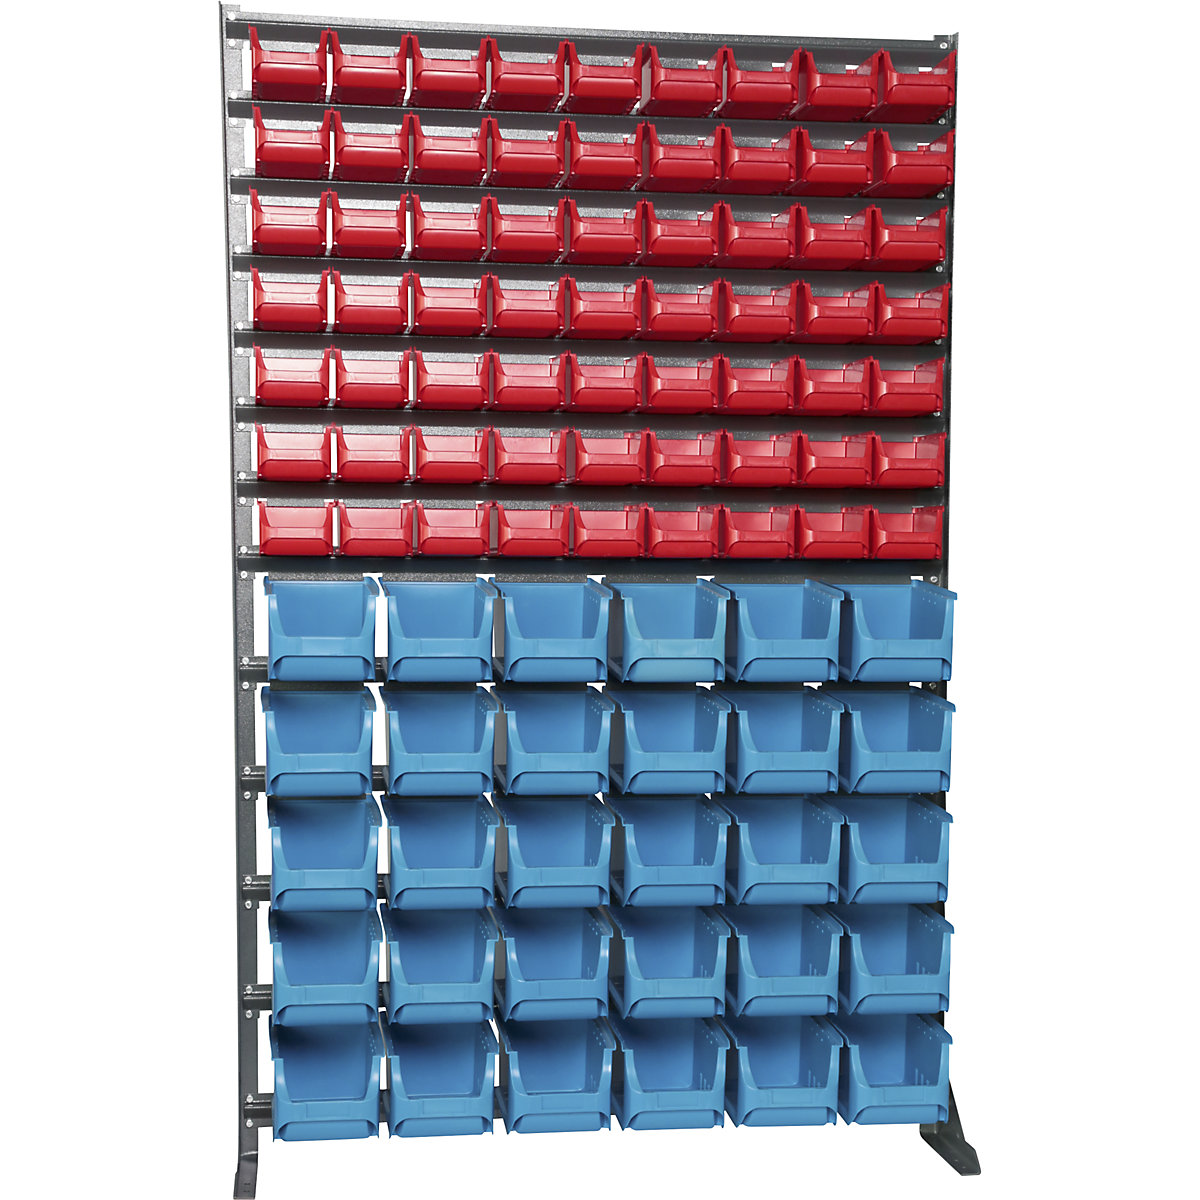 Small parts shelf unit, width 1020 mm, with open fronted storage bins, HxD 1580 x 235 mm-4